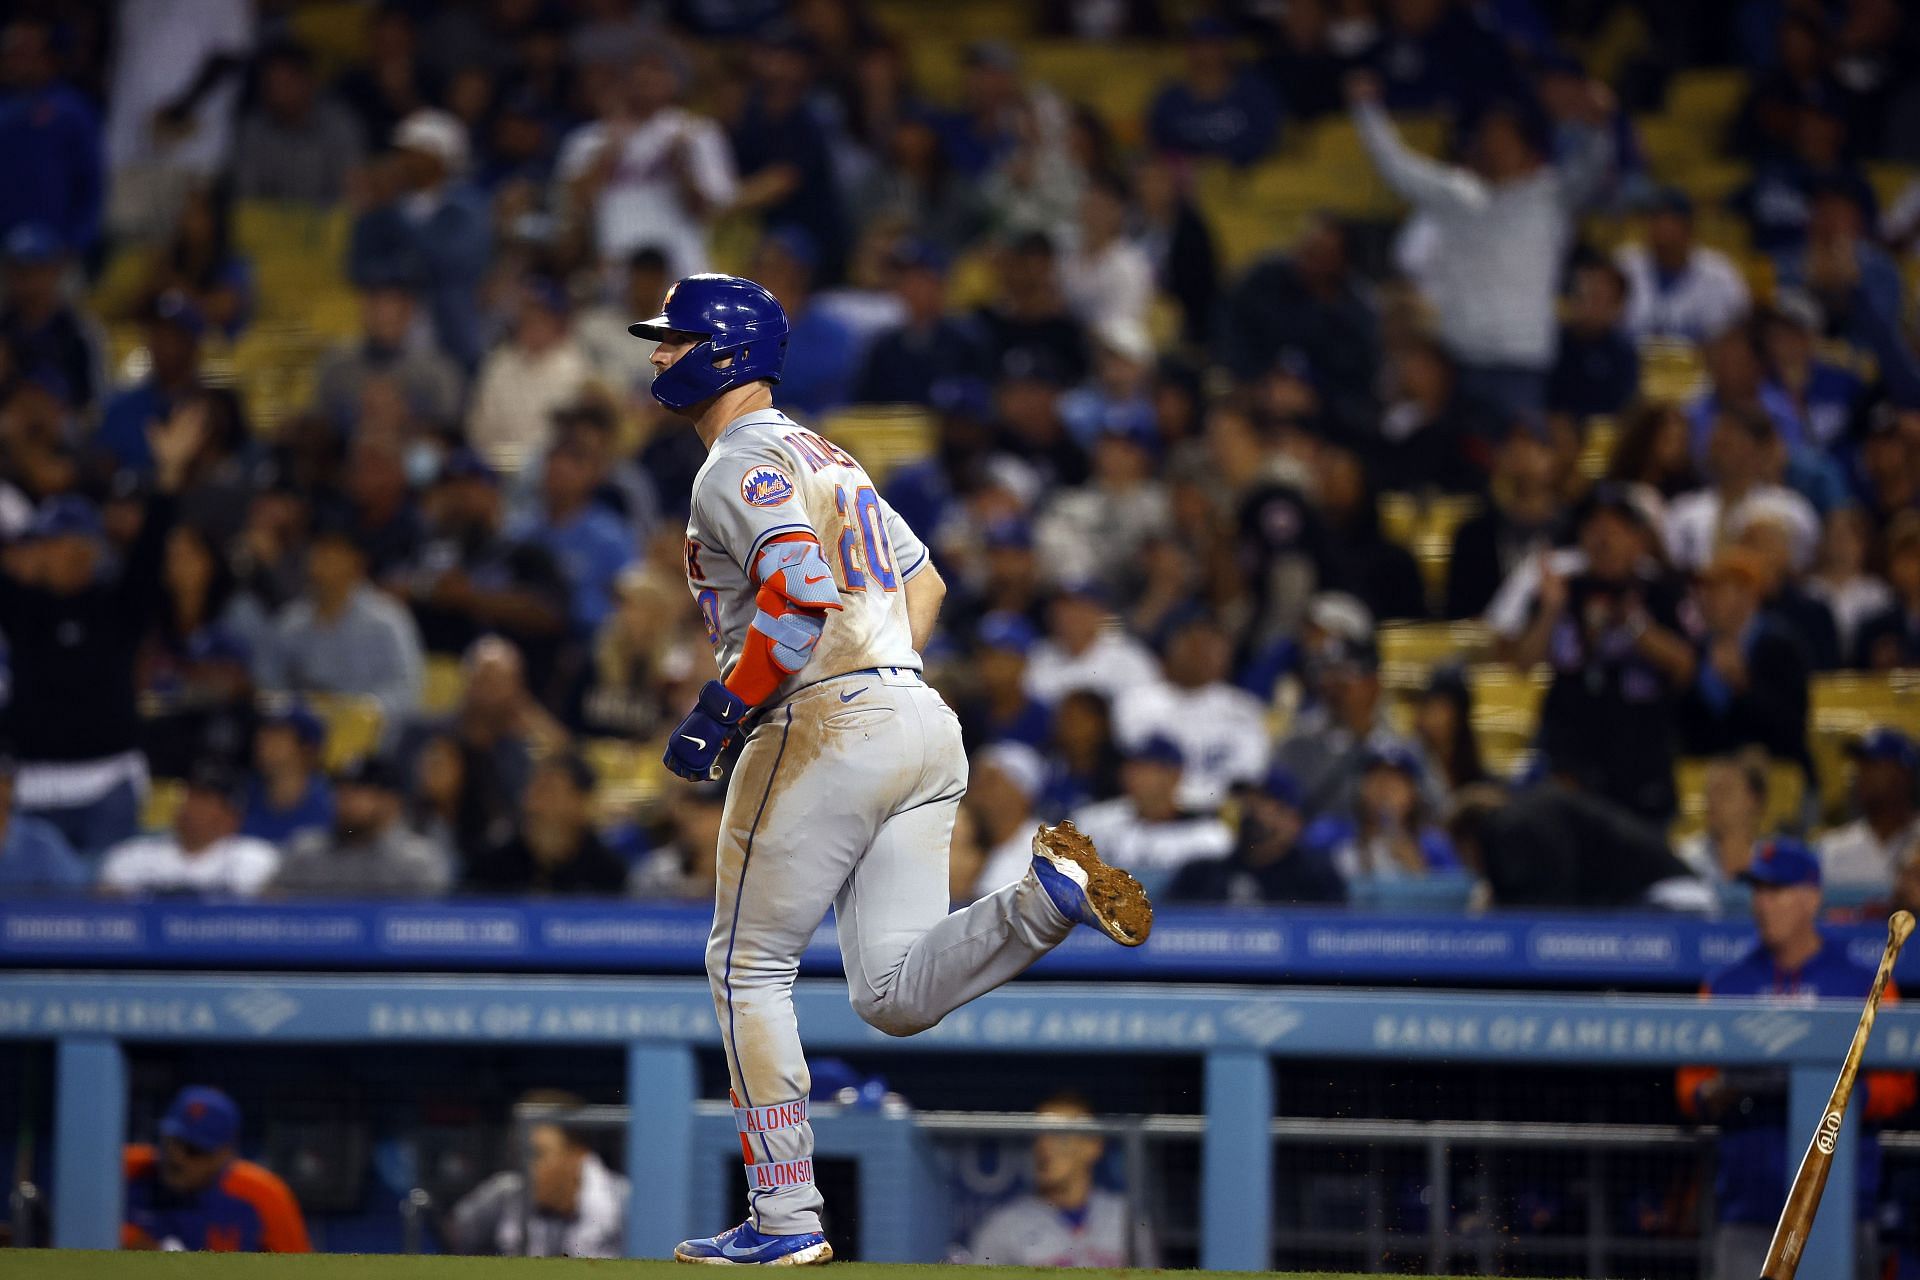 Donovan Mitchell cheered on New York Mets slugger Pete Alonso last night after he hit two home runs